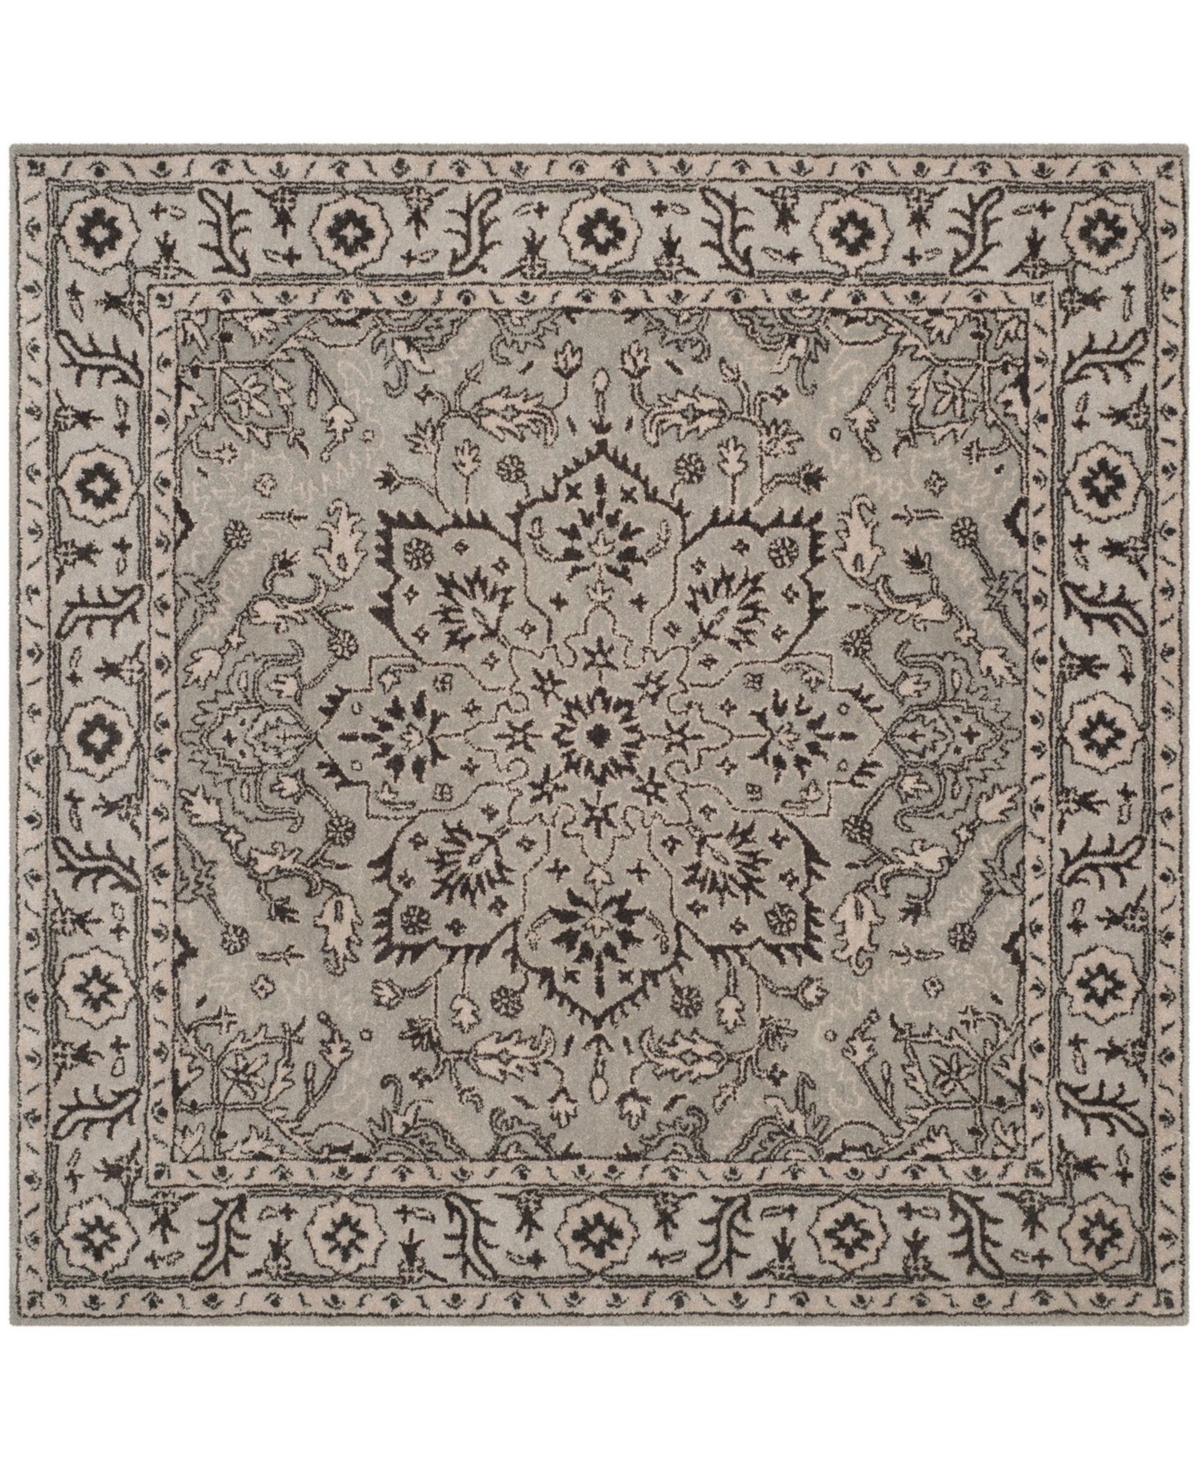 Safavieh Antiquity At58 Gray and Beige 6' x 6' Square Area Rug - Gray